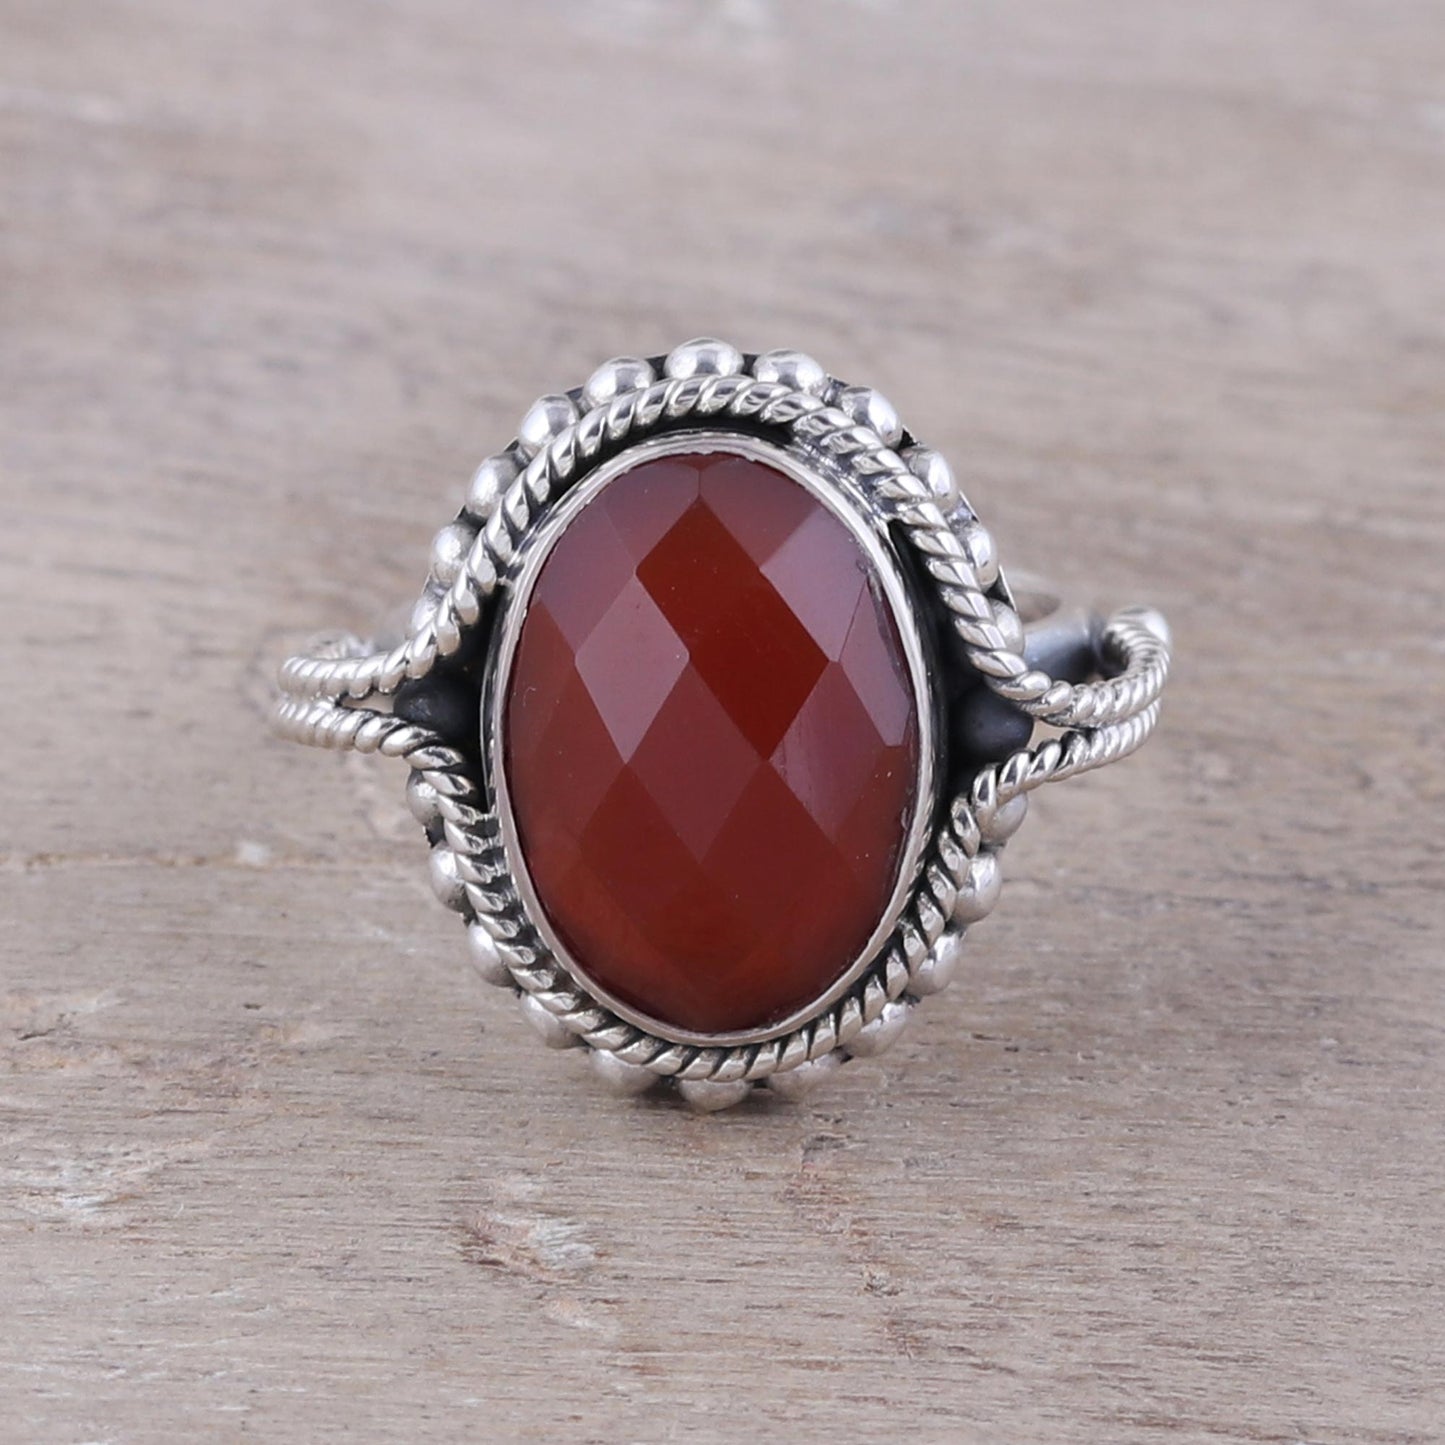 Sun Afire Carnelian Ring Artisan Crafted Sterling Silver Jewelry